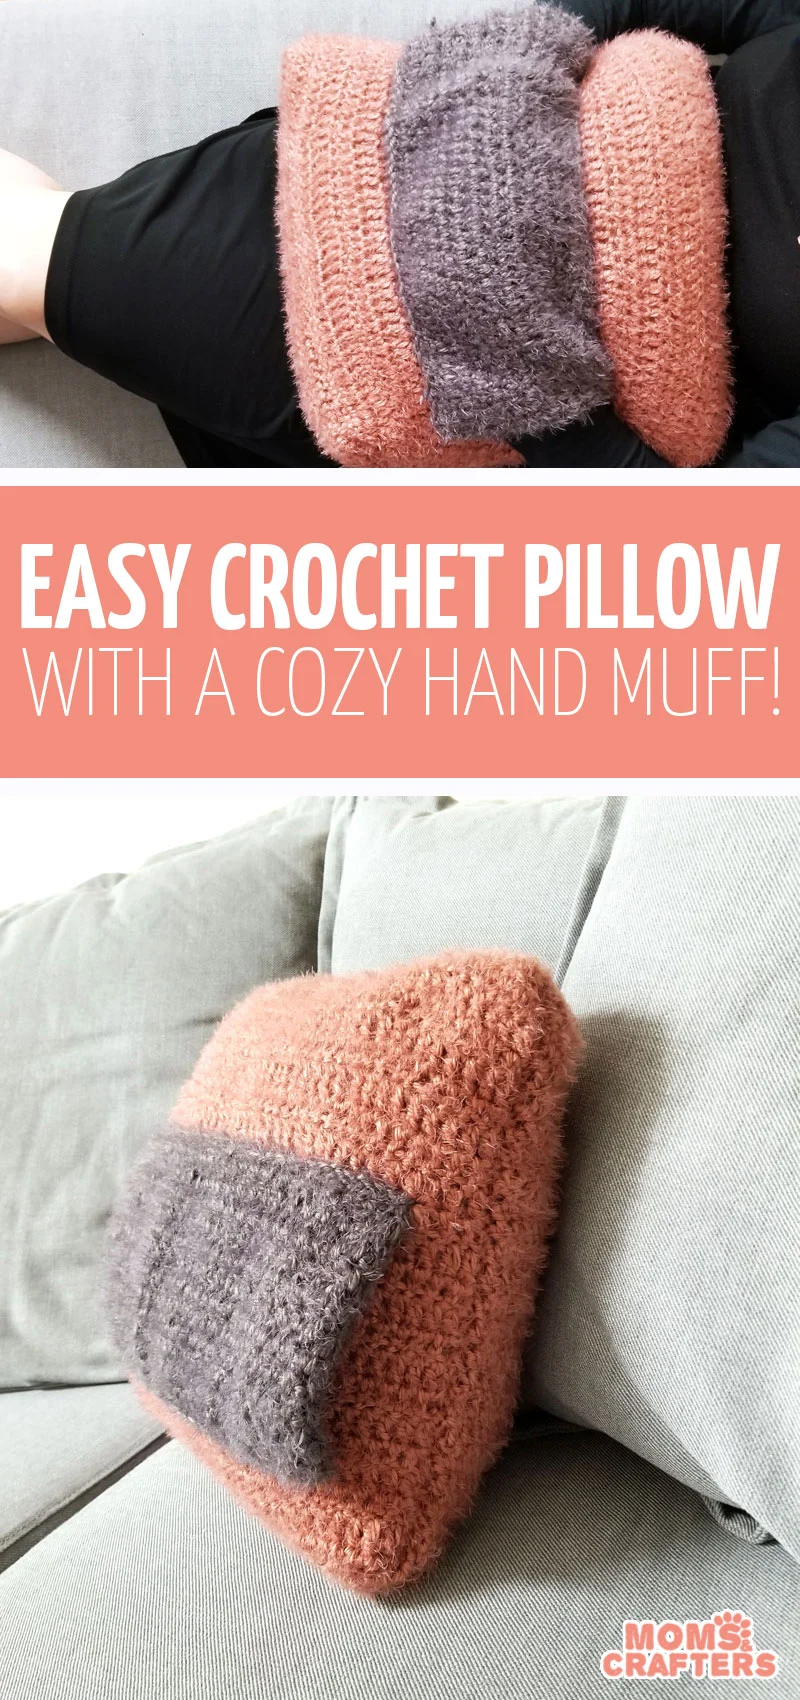 Click to learn how to make an easy crochet throw pillow to add some hygge to your home decor! #hygge #homedecor #crochet